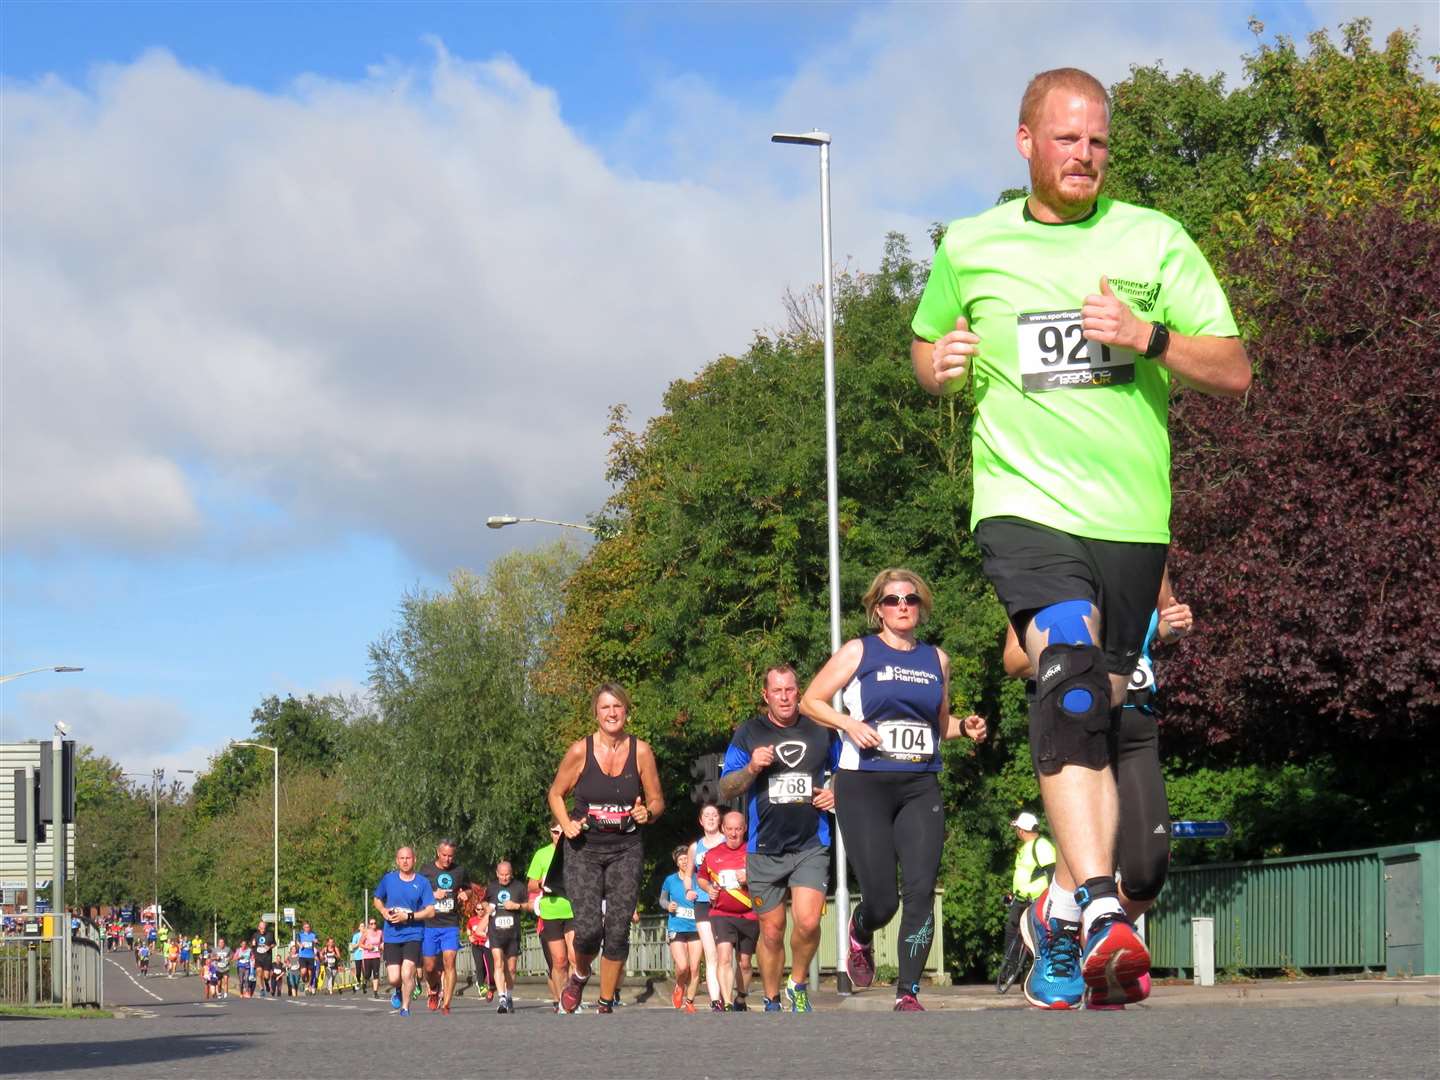 Paul Spencer is pictured during last year's Givaudan 10k race, as runners approach the Mace Lane roundabout in Ashford. Picture: Andy Clark